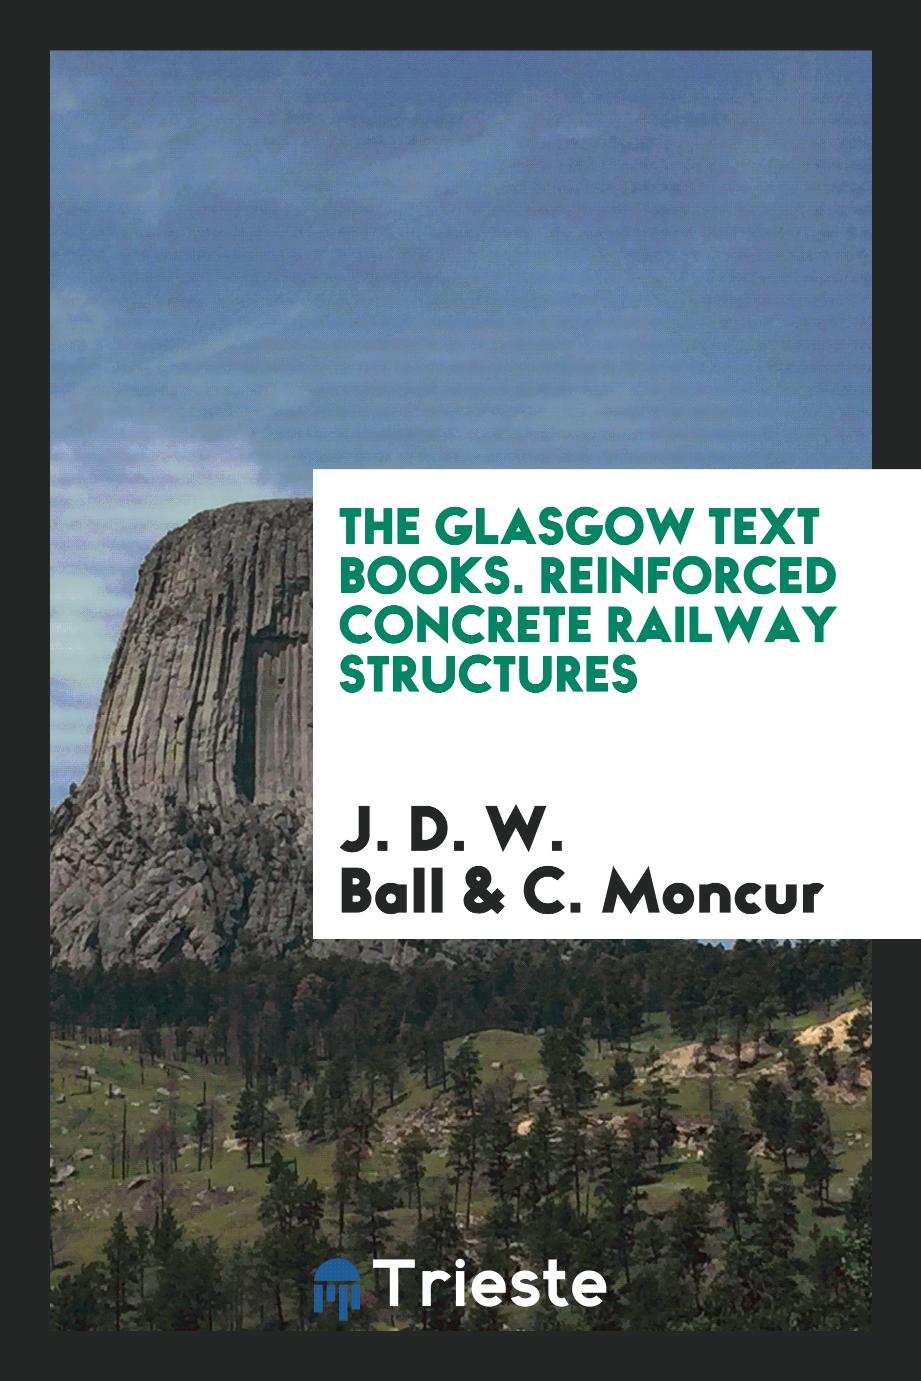 The Glasgow Text Books. Reinforced Concrete Railway Structures